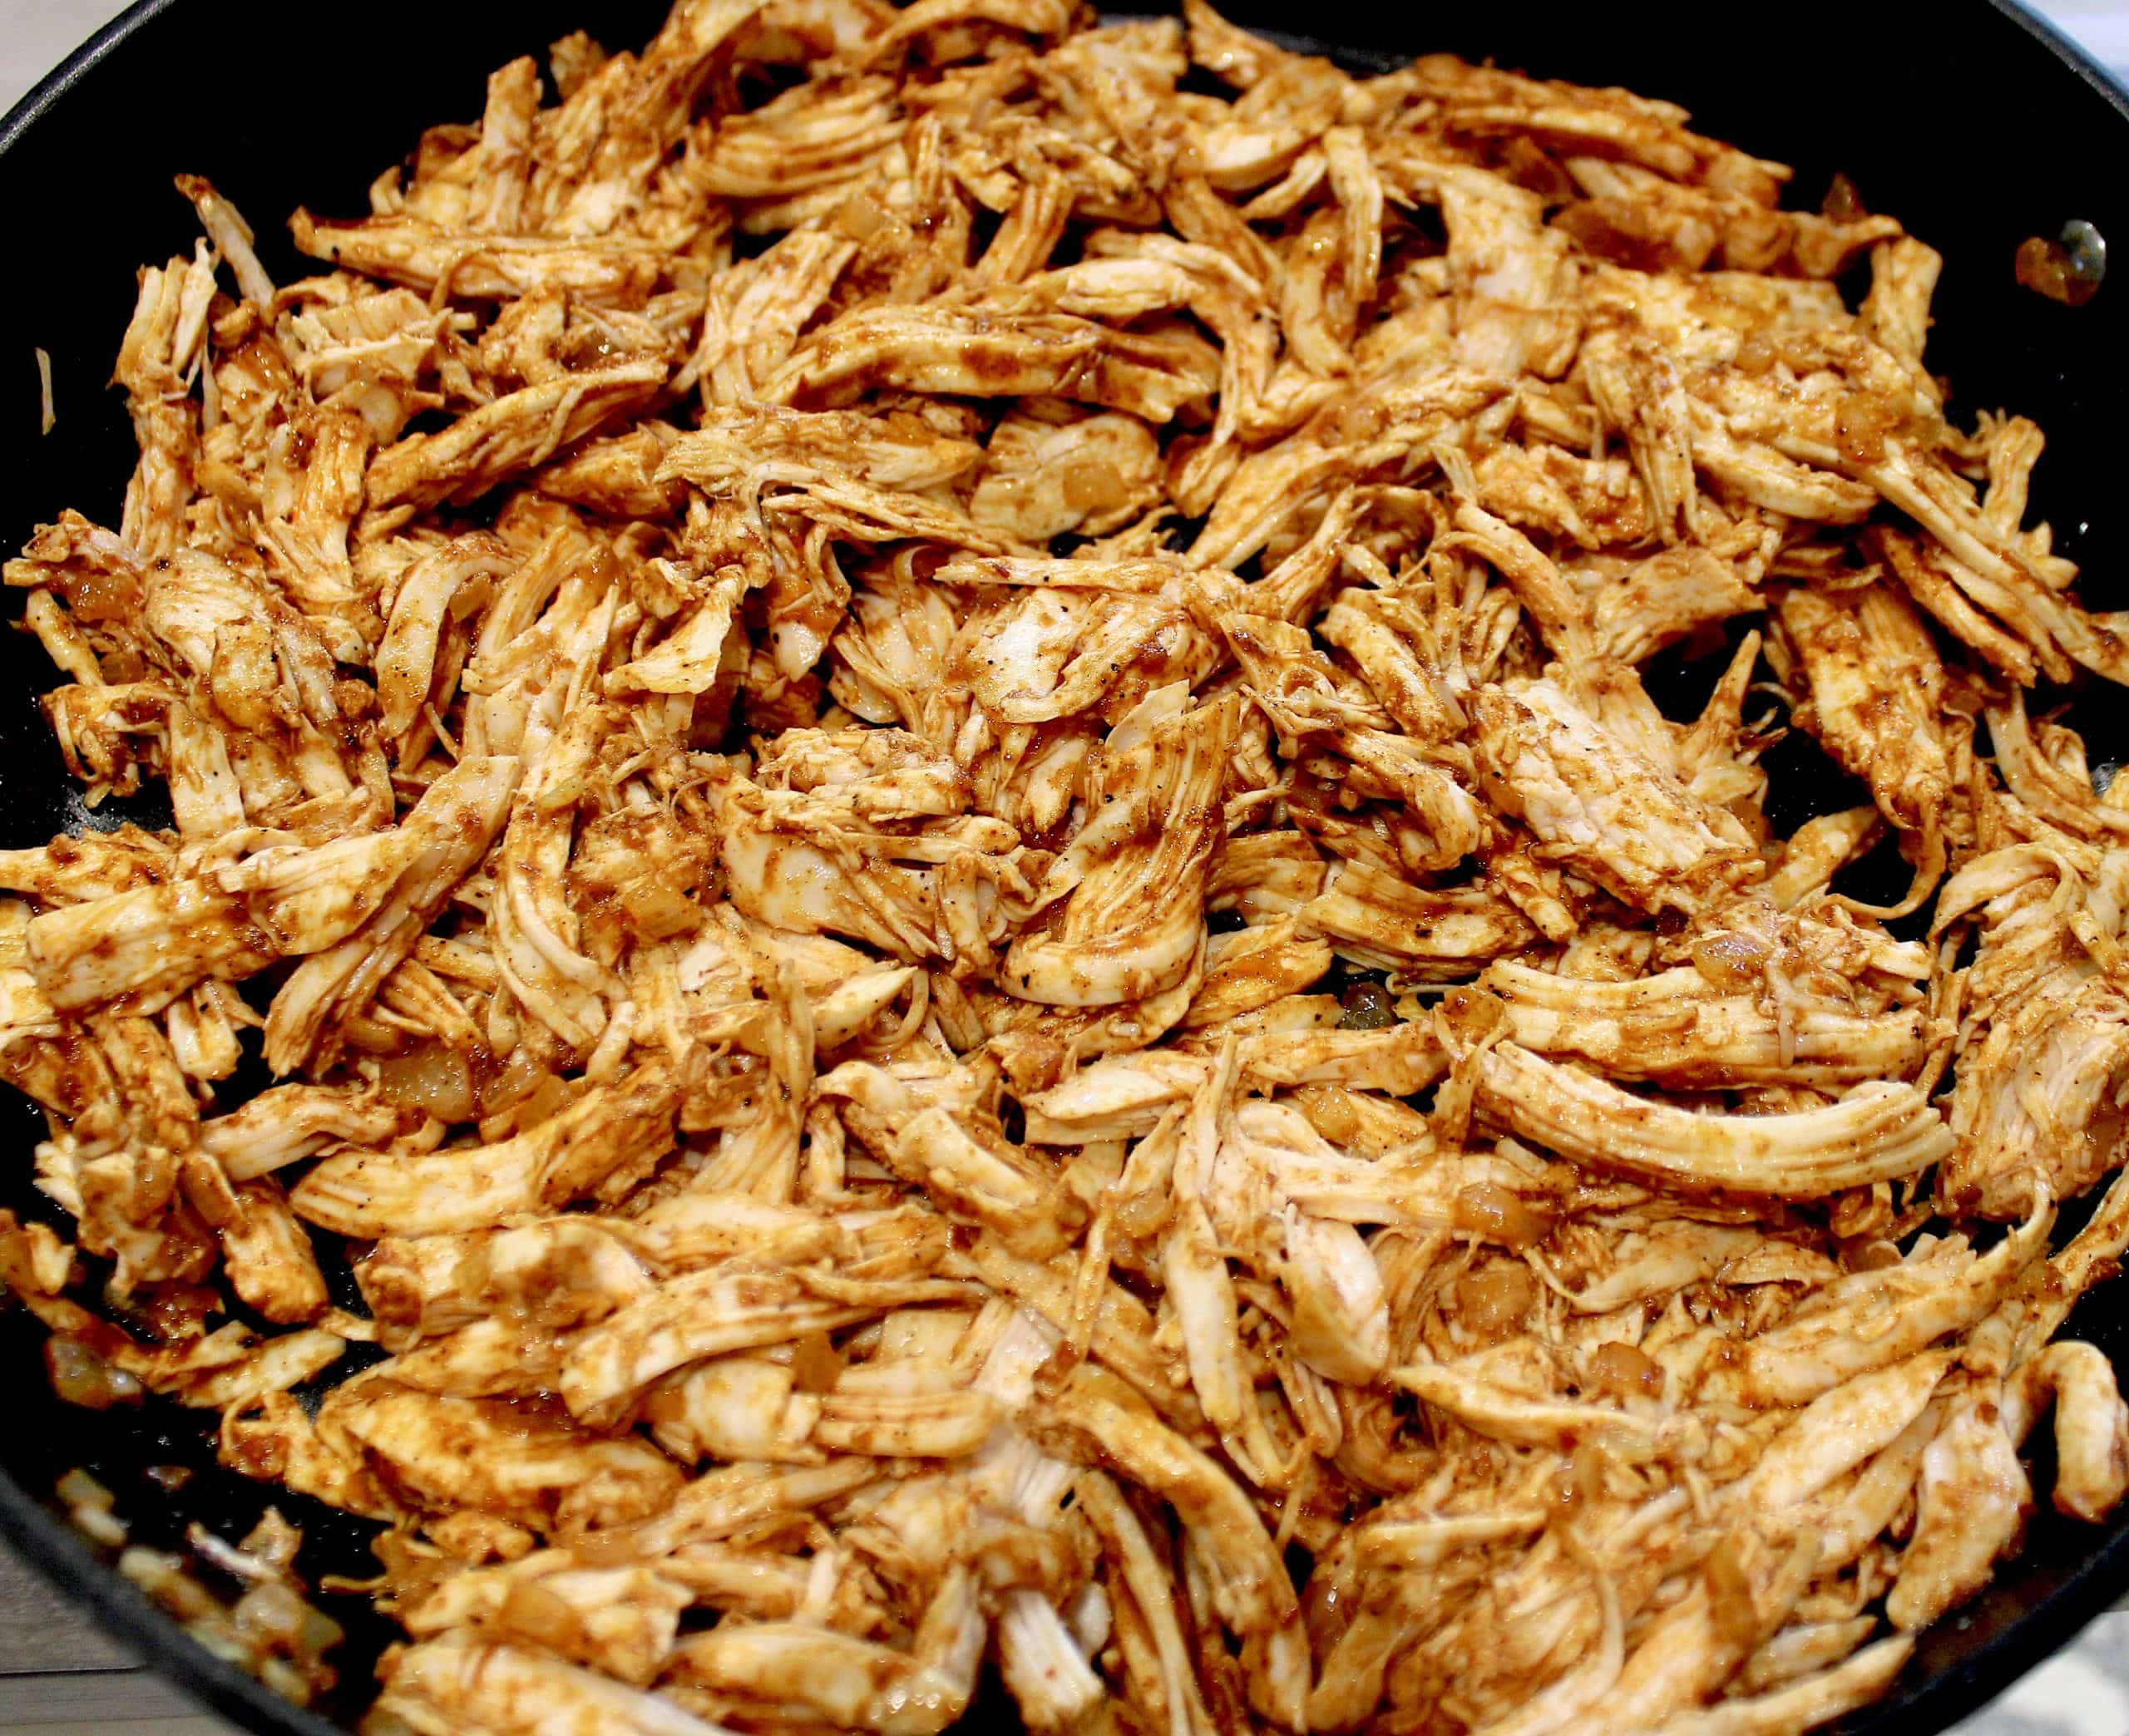 shredded chicken in skillet with enchilada sauce mixed in